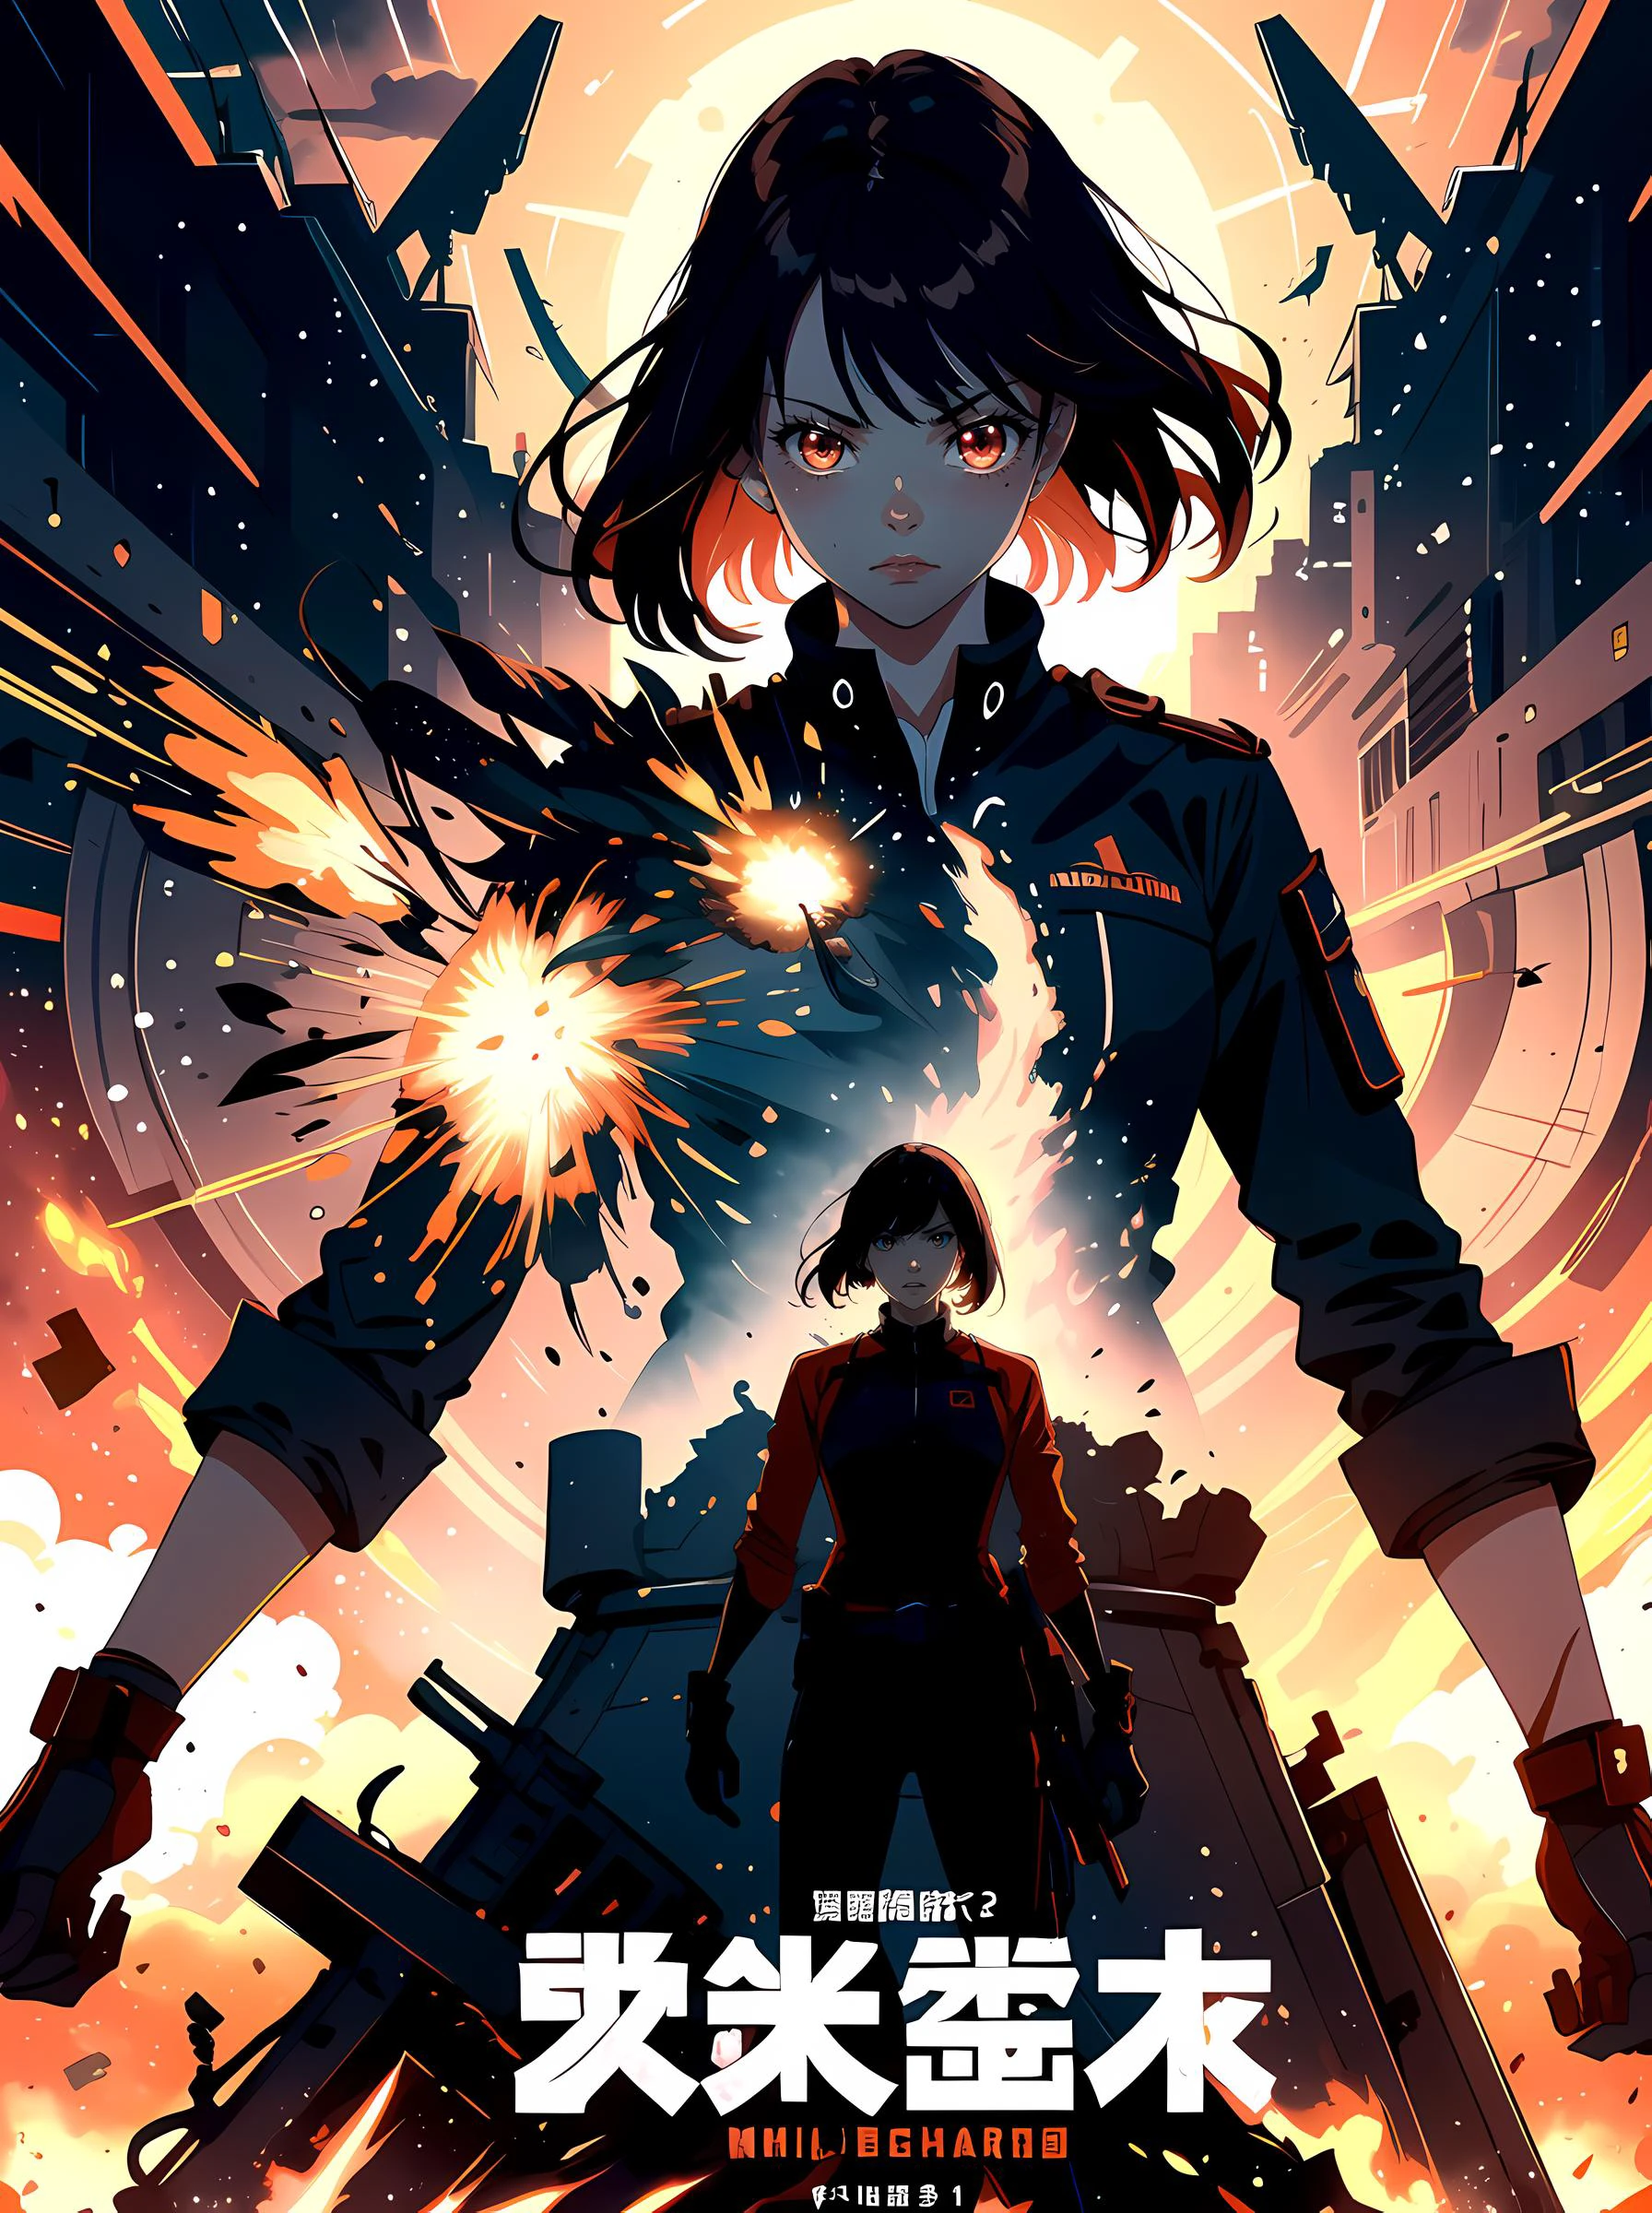 (Best Quality, Masterpiece), A cinematic movie poster for an action film, two women, 21 years old, determined, action-packed, explosions, beams, blasters, cinematic, fade, evil demon in the background overhead